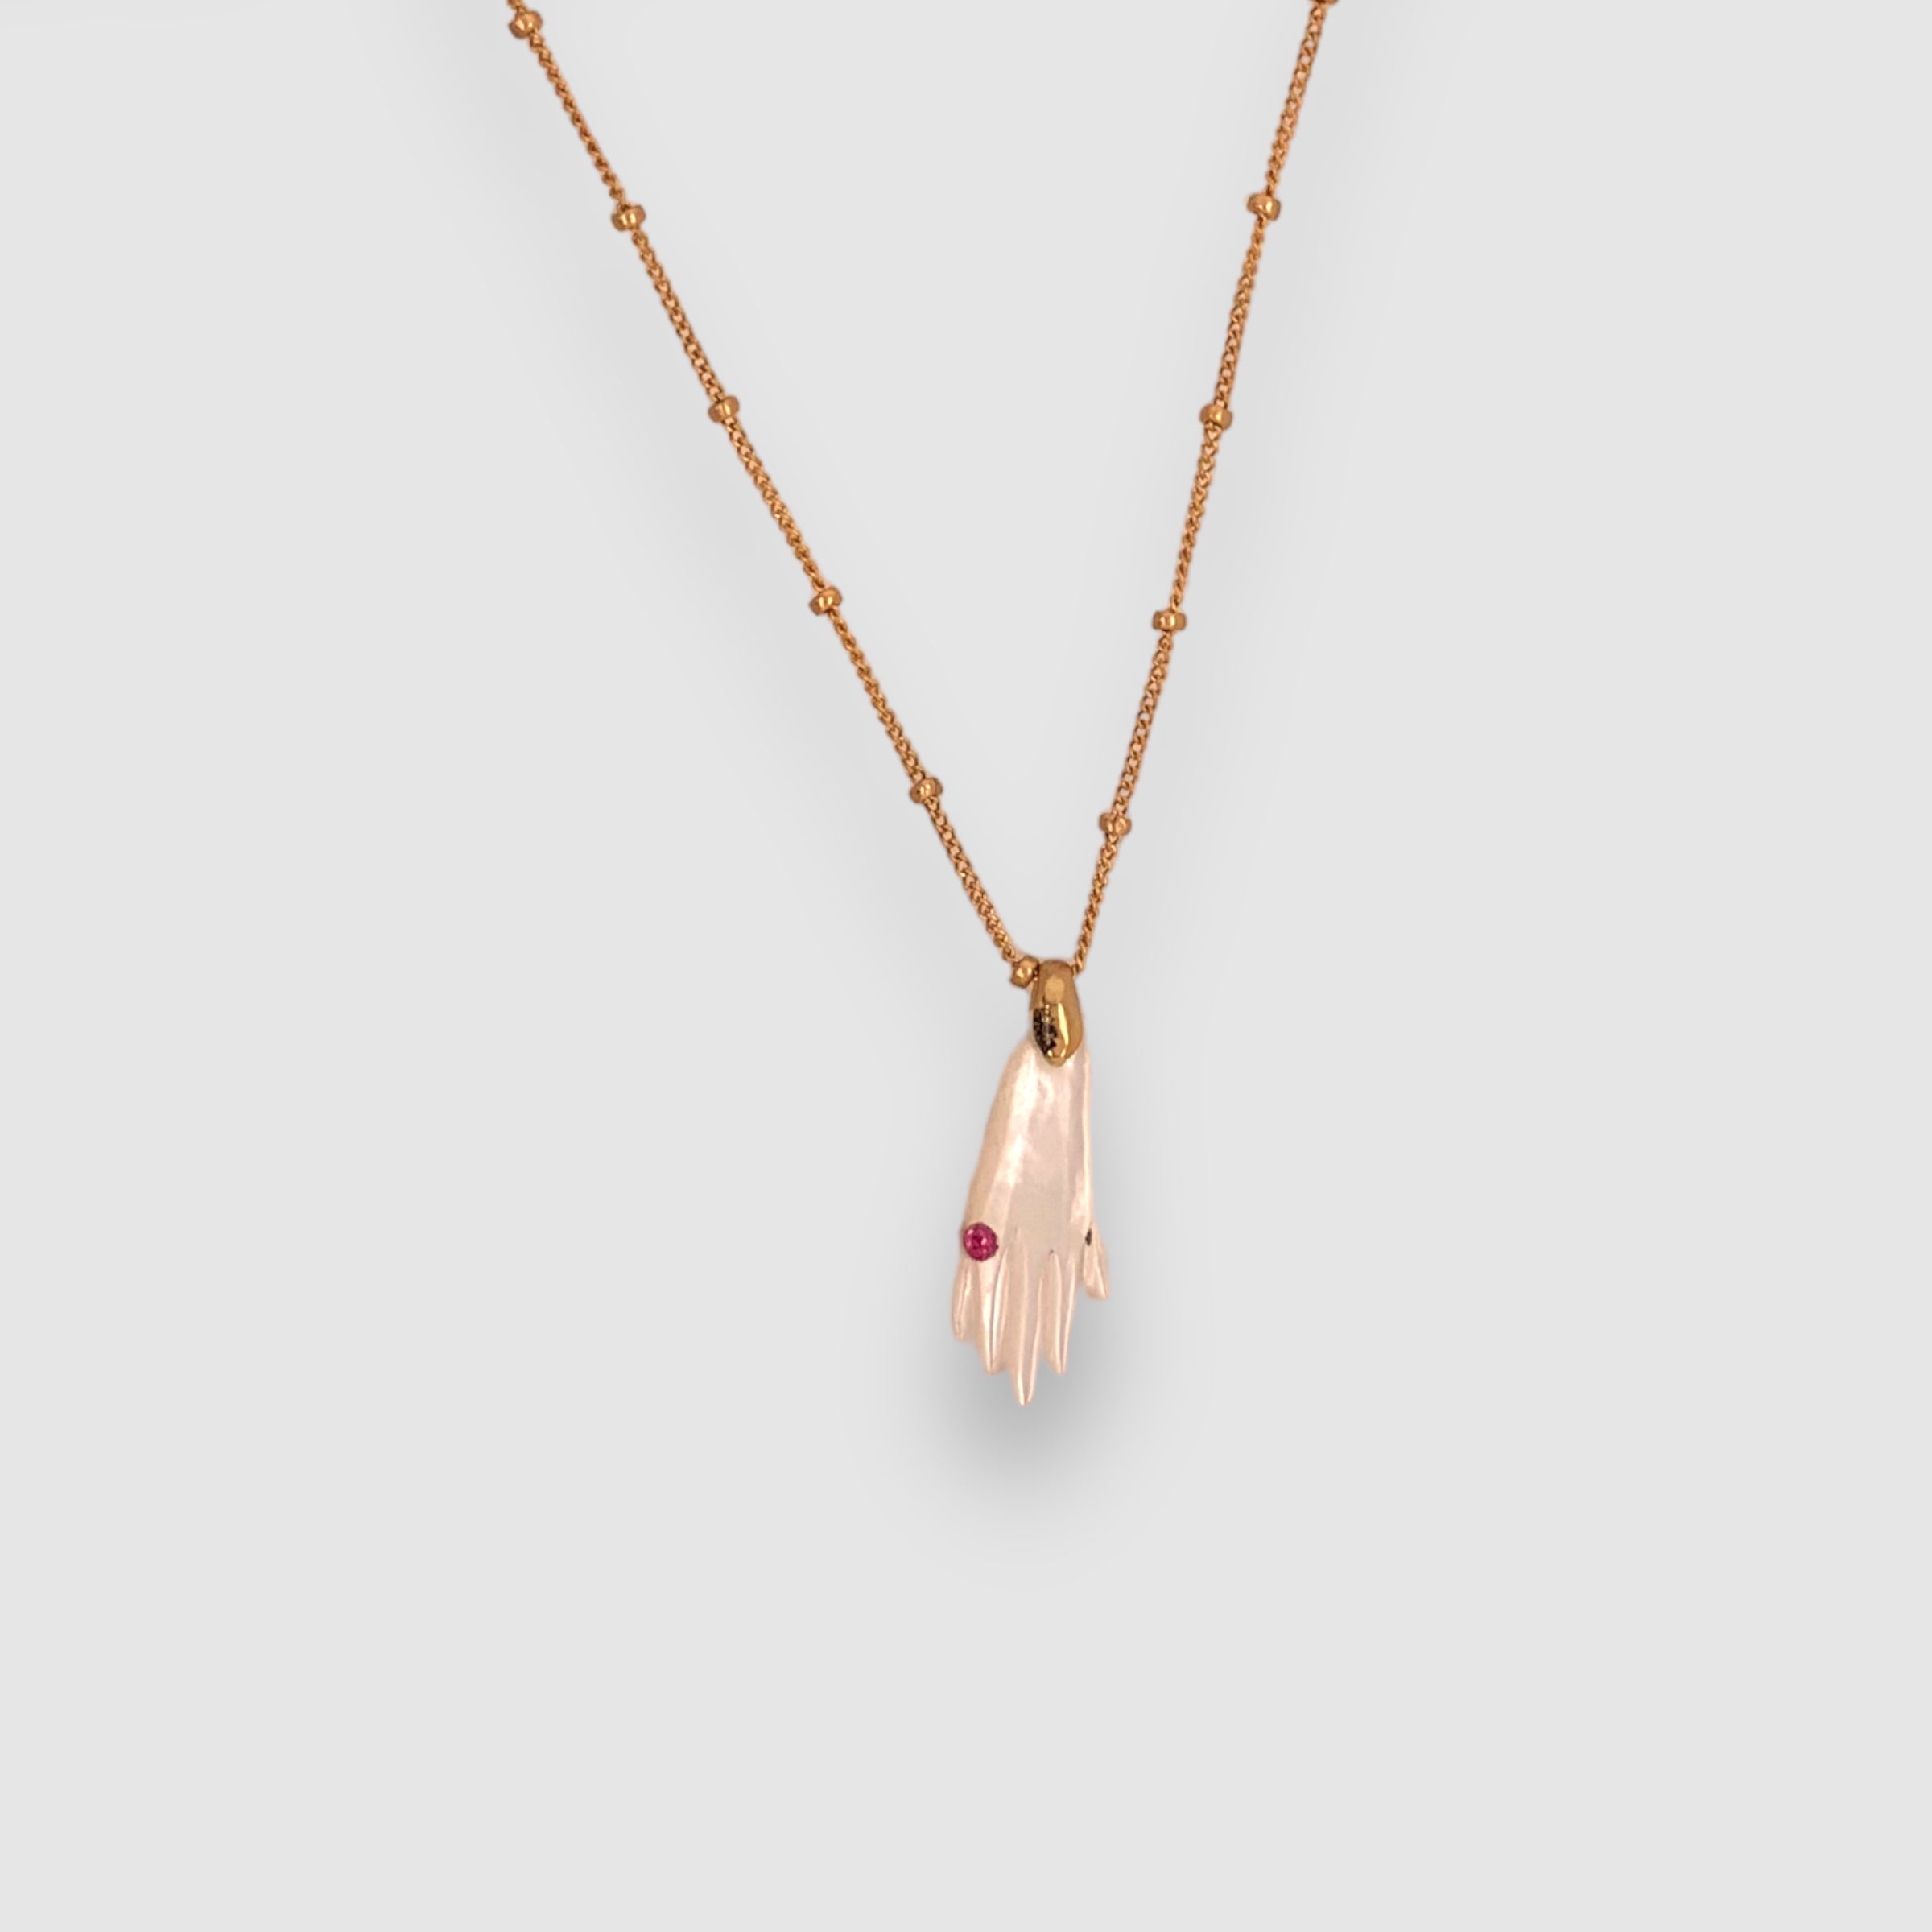 POESIA DEL MAR // NECKLACE // MOTHER OF PEARL // HAND // PINK